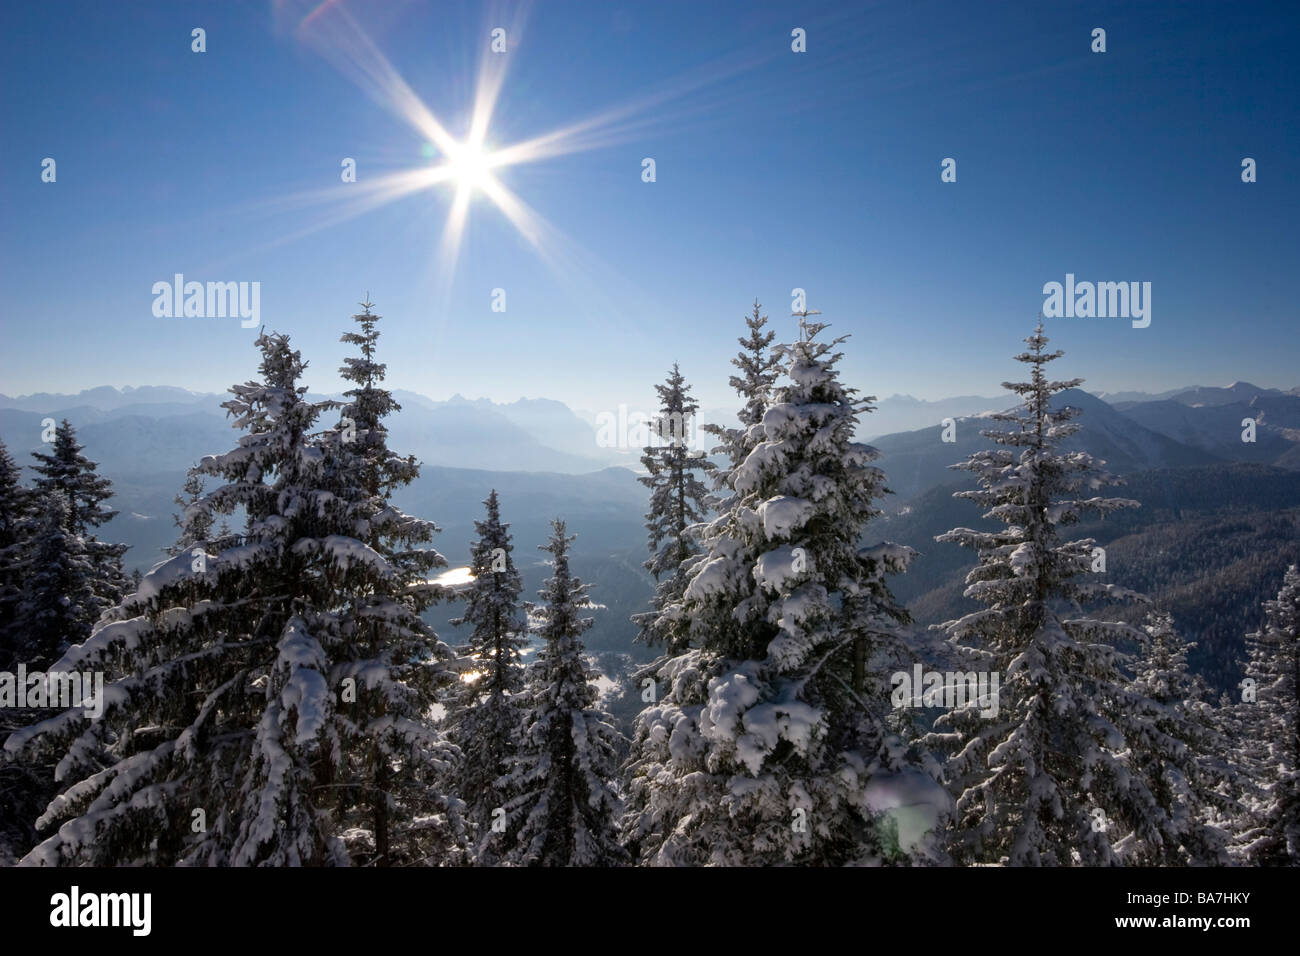 Winter scenery in the Bavarian Alps seen from Herzogstand, Upper Bavaria, Germany Stock Photo